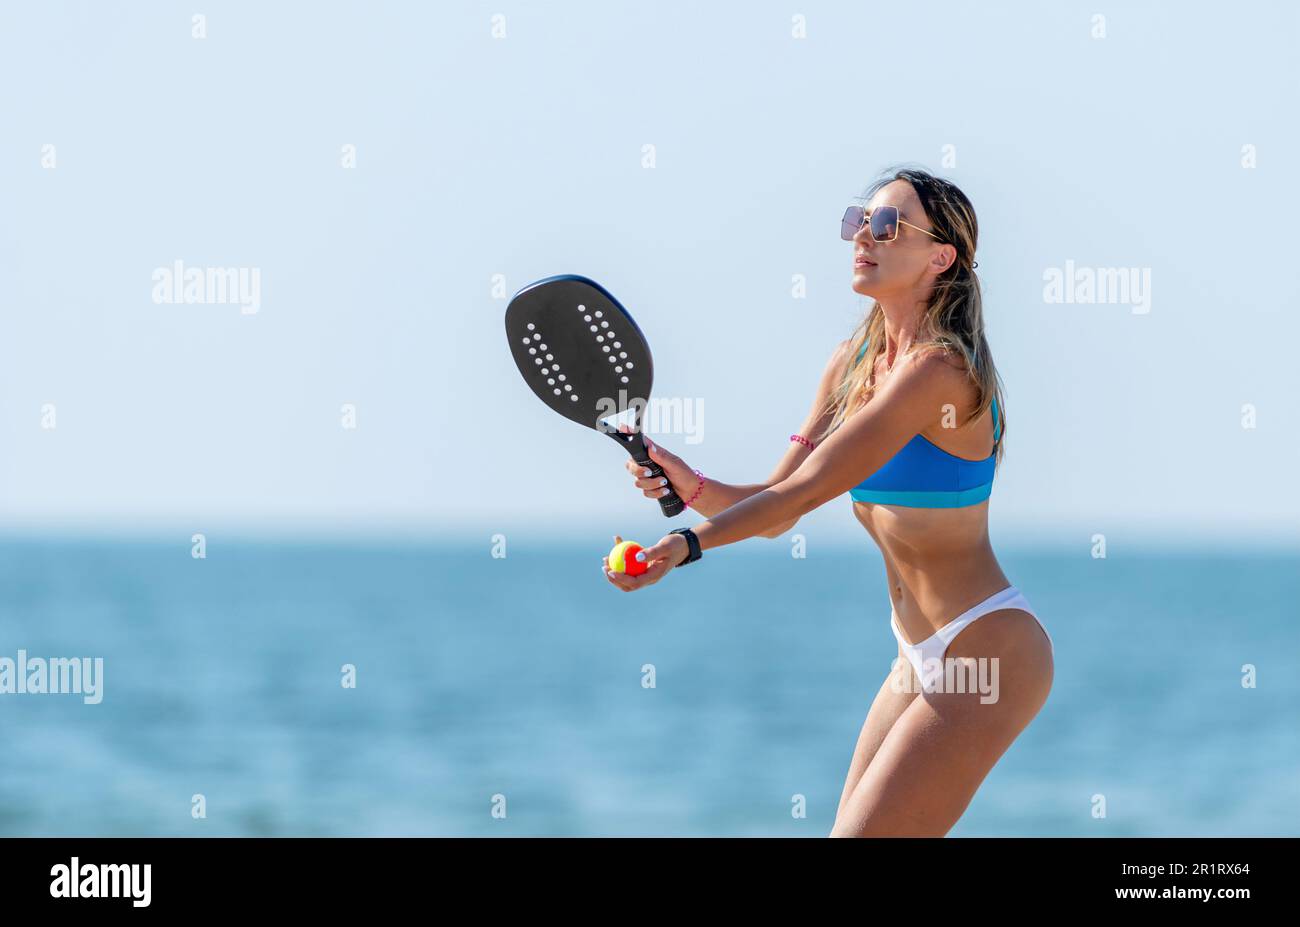 Woman playing beach tennis on a beach. Professional sport concept. Horizontal sport theme poster, greeting cards, headers, website and app Stock Photo